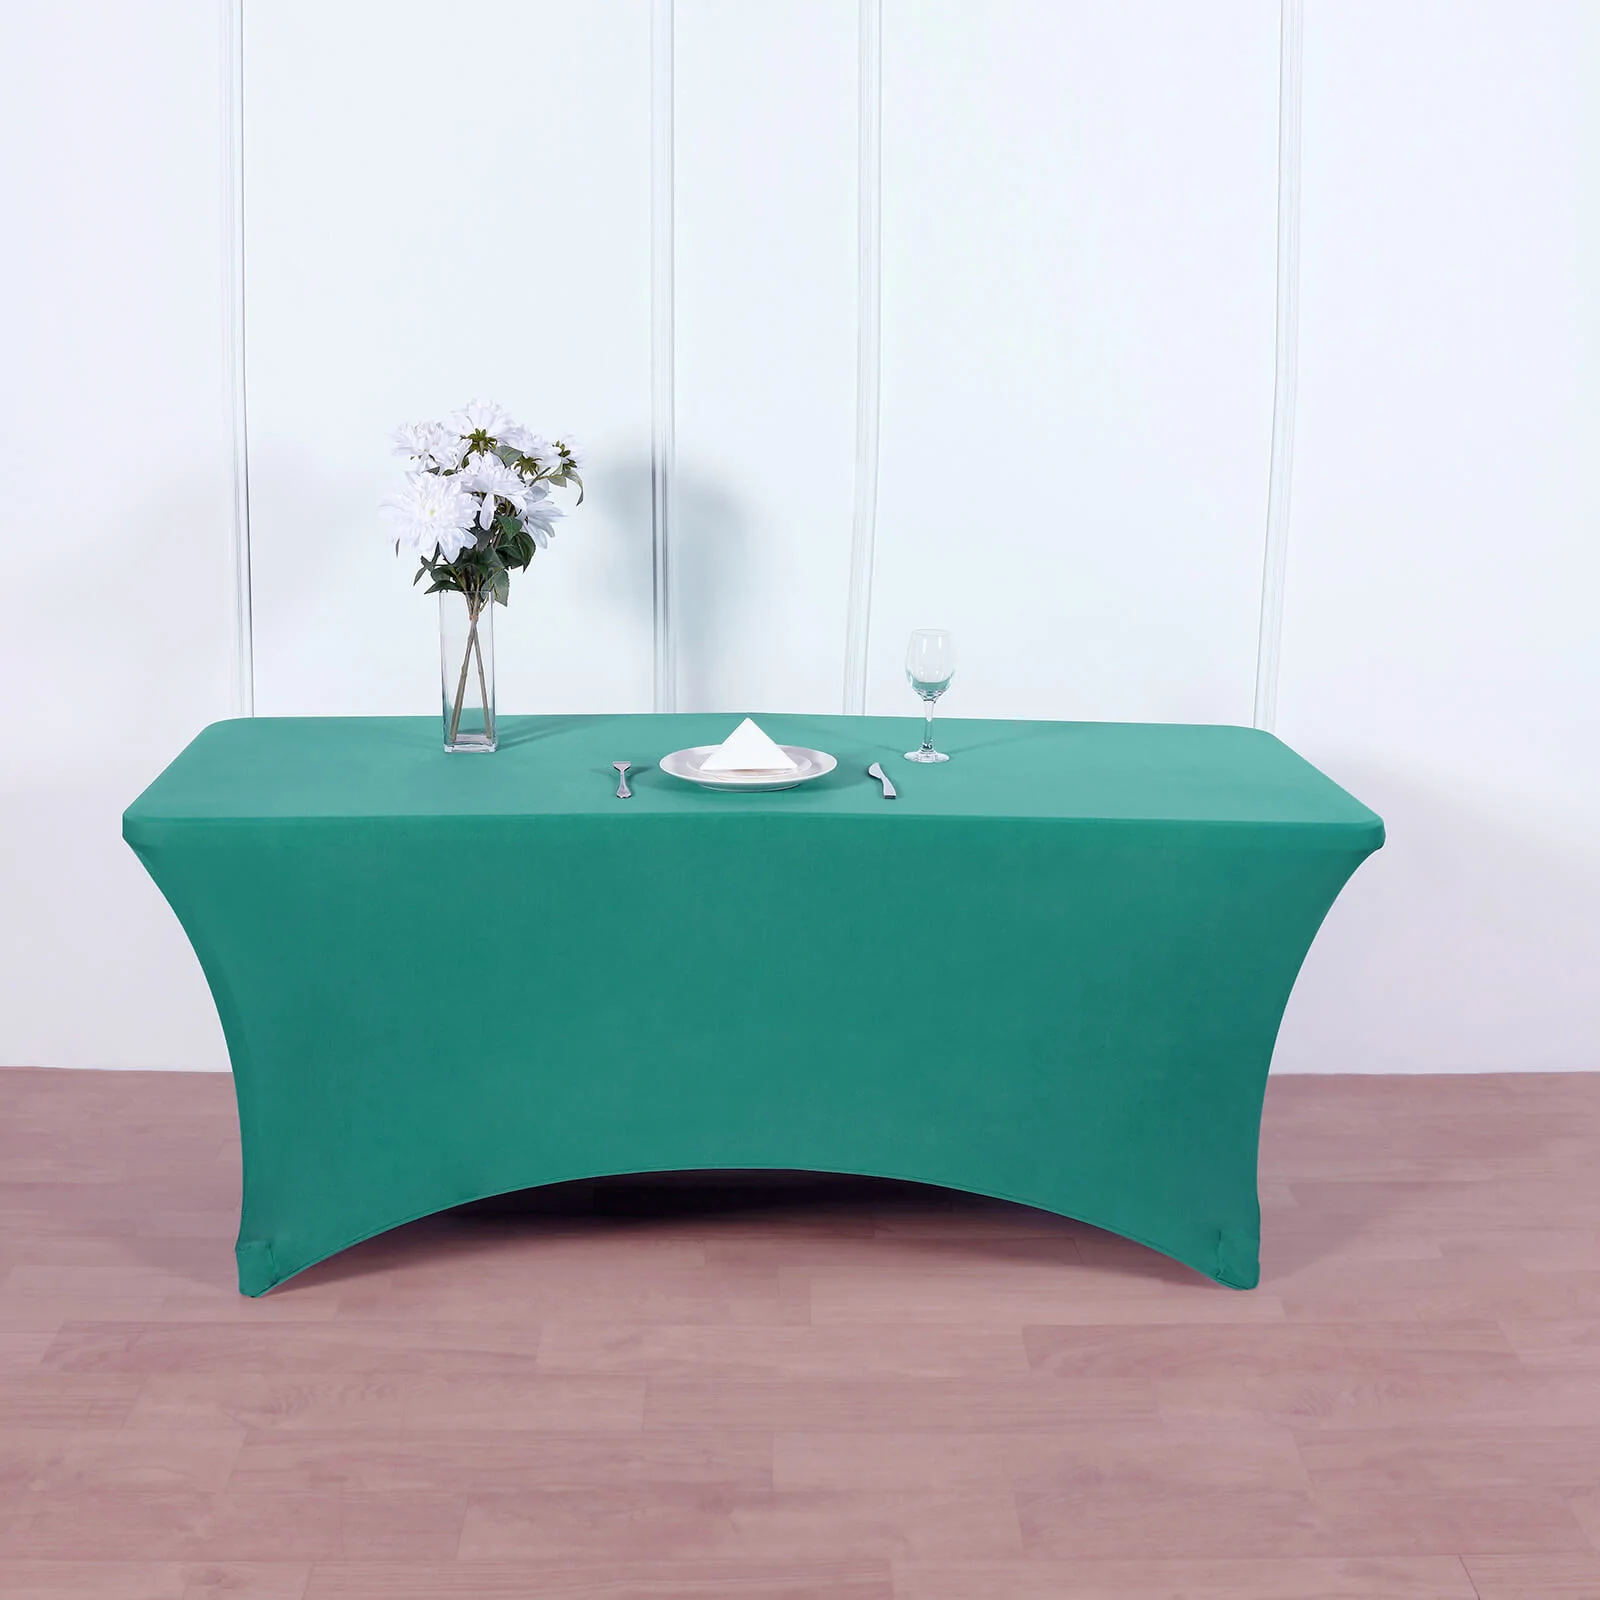 Teal - 6 Ft Rectangular Spandex Table Cover Wedding Party - $39.88